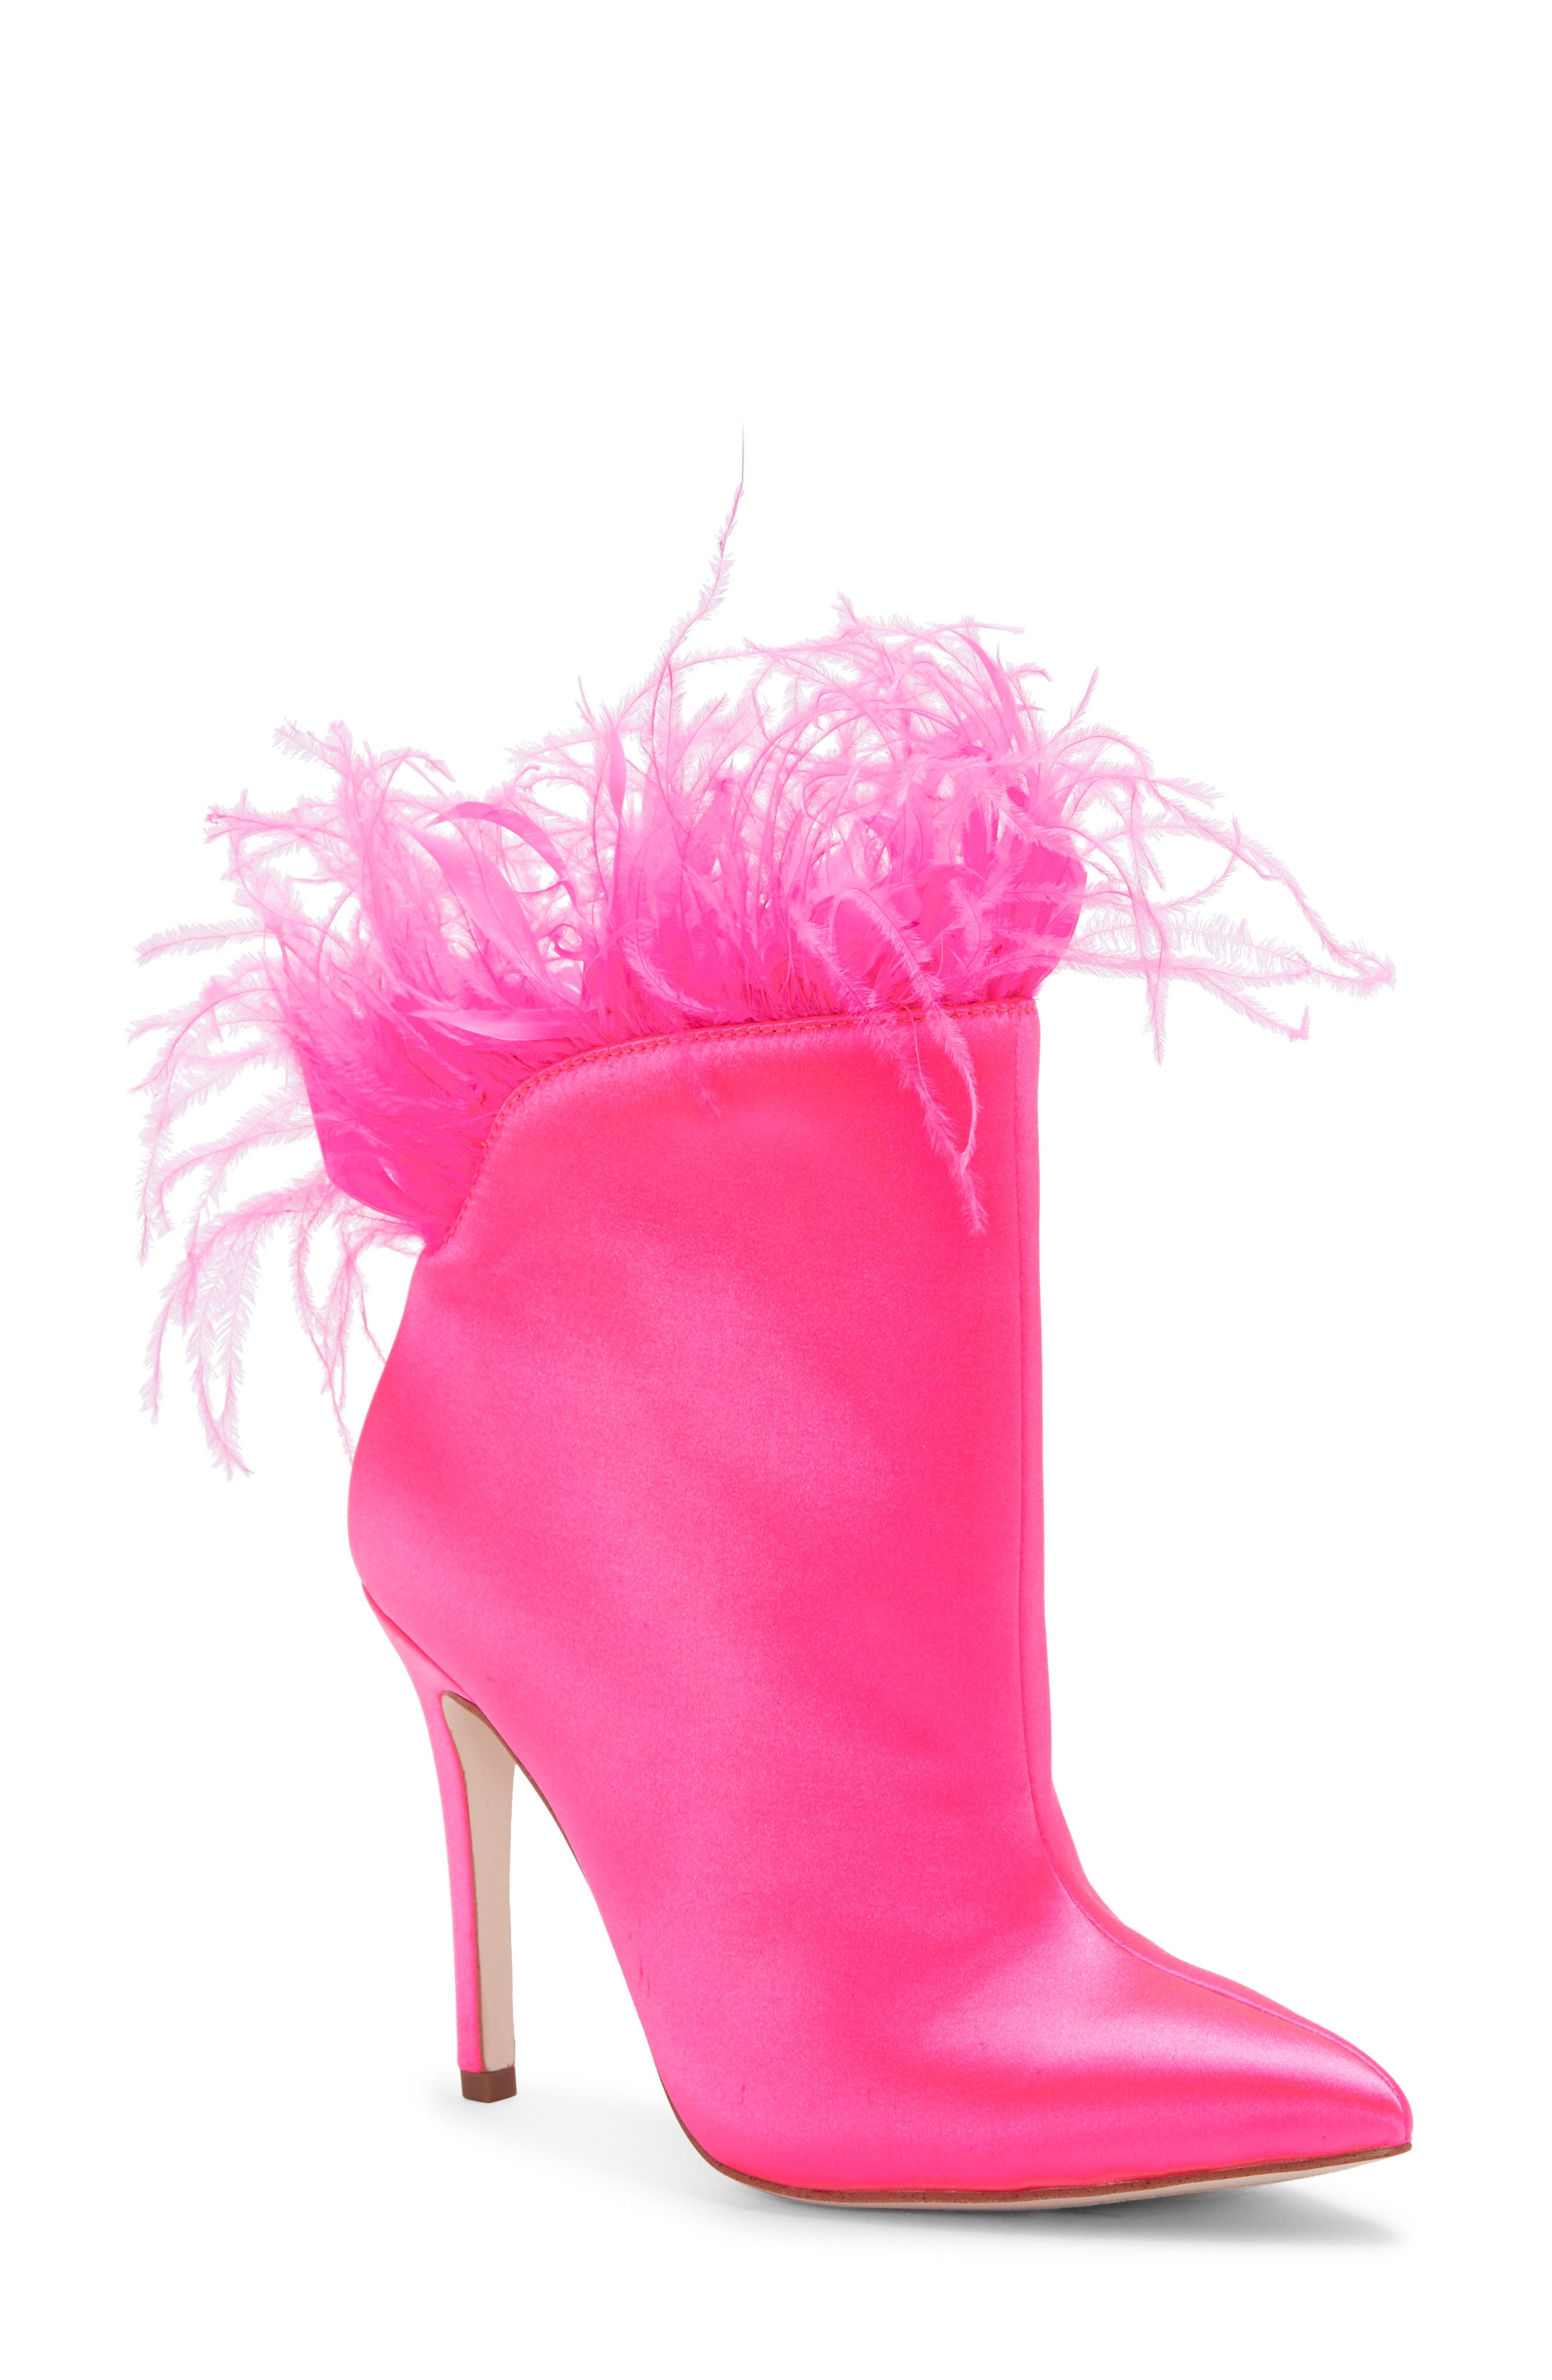 jessica simpson feather shoes